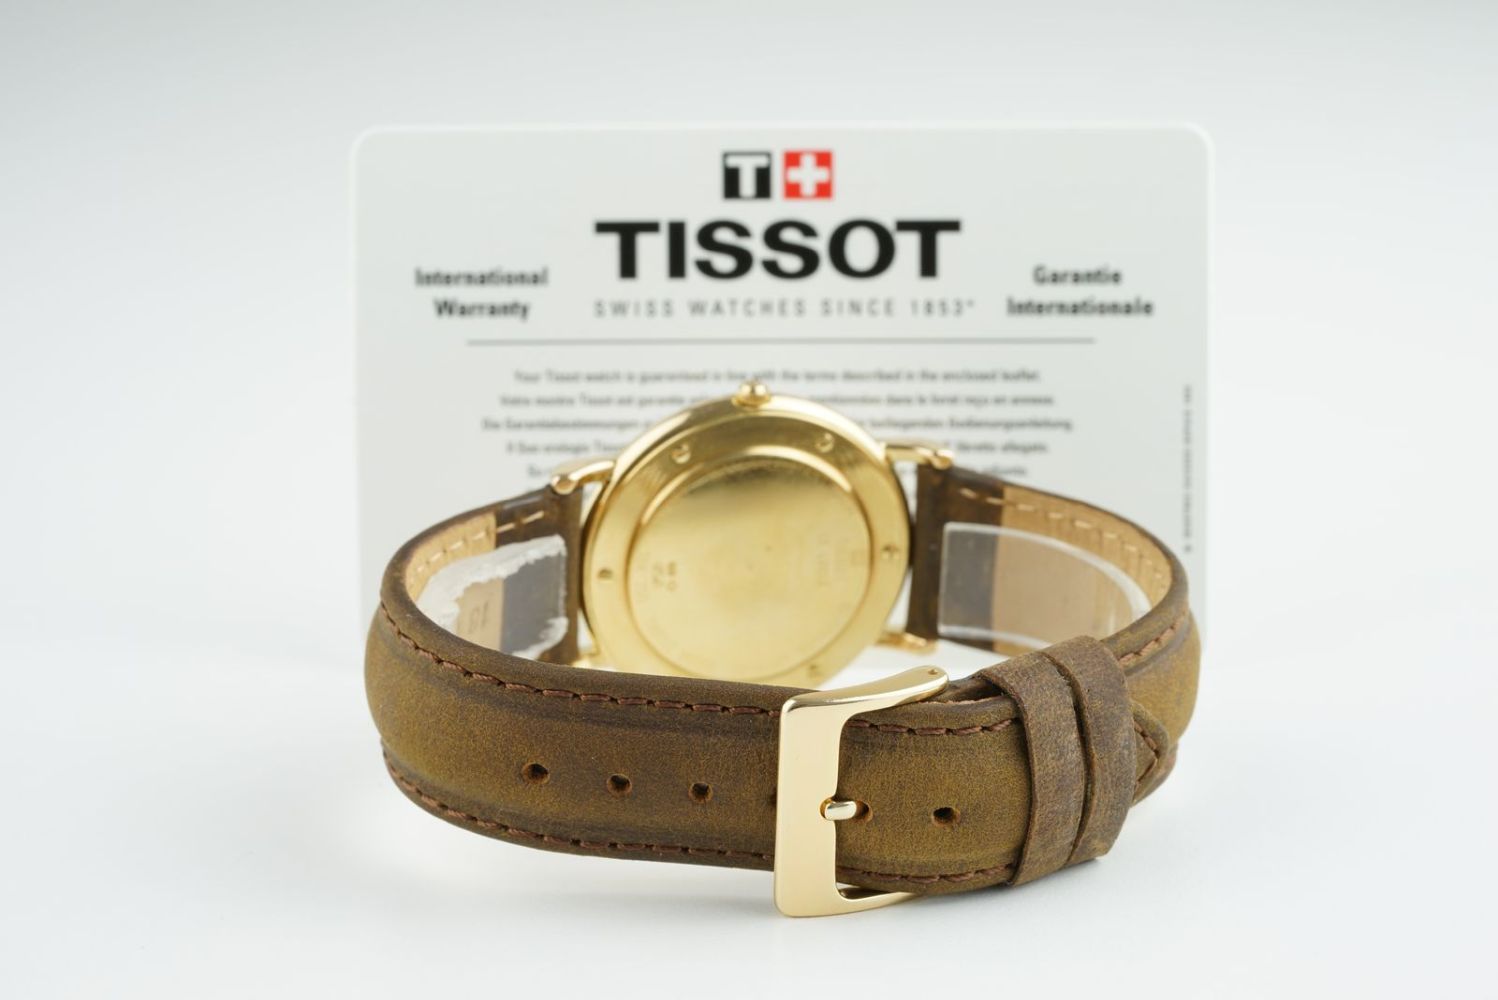 GENTLEMENS TISSOT 18CT GOLD DATE WRISTWATCH W/ WARRANTY CARD, circular white dial with roman numeral - Image 3 of 3